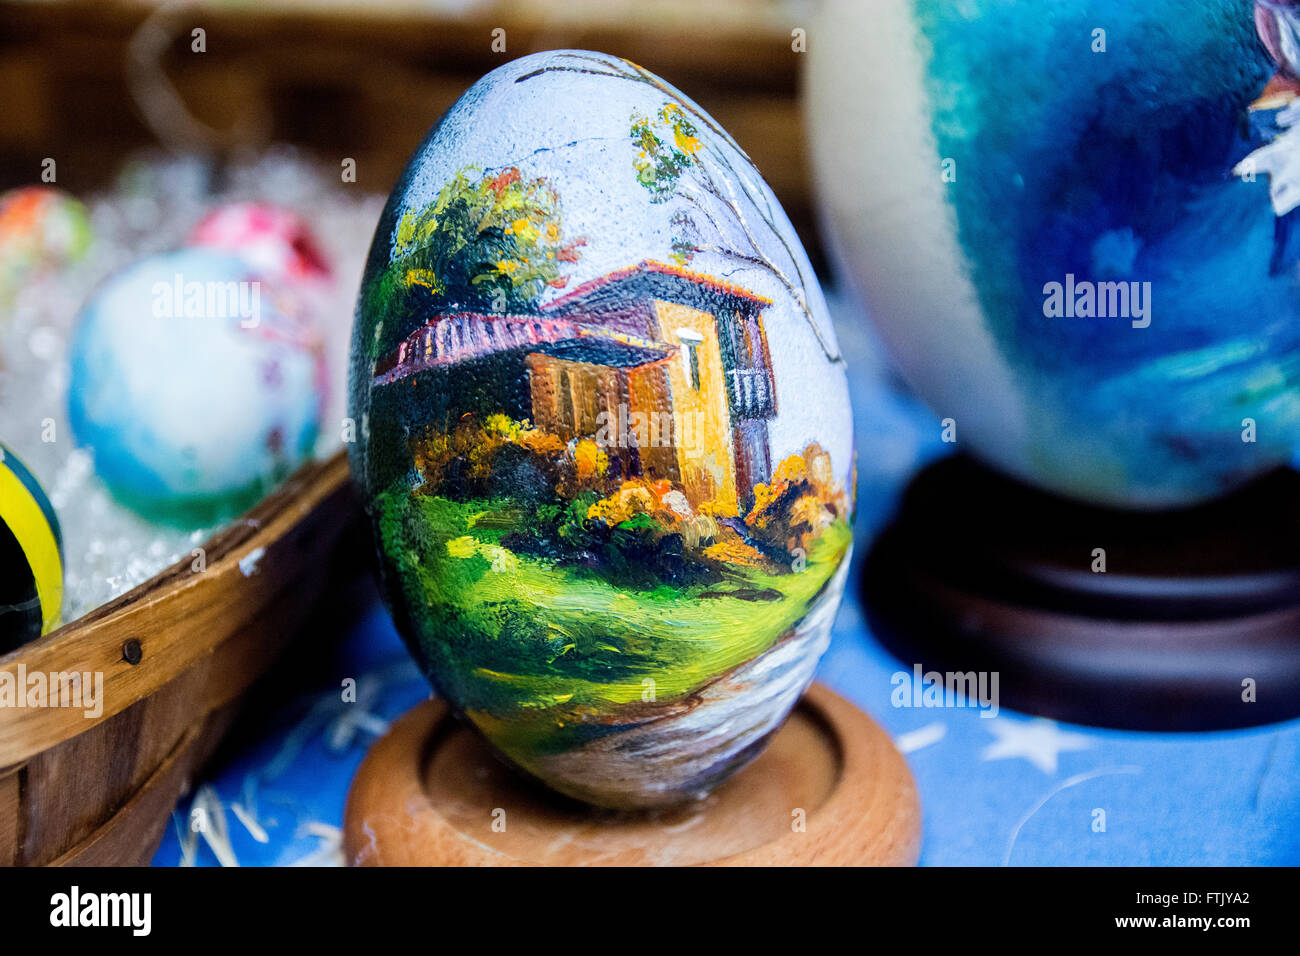 Pola de Siero, Spain. 29th March, 2016. A painted hen egg which represents a country house at the Feast of Easter Eggs of Pola de Siero, the only Spanish city in which this feast is celebrated, on the first Tuesday after Easter Sunday, with thousands of eggs painted by hand. © David Gato/Alamy Live News Stock Photo